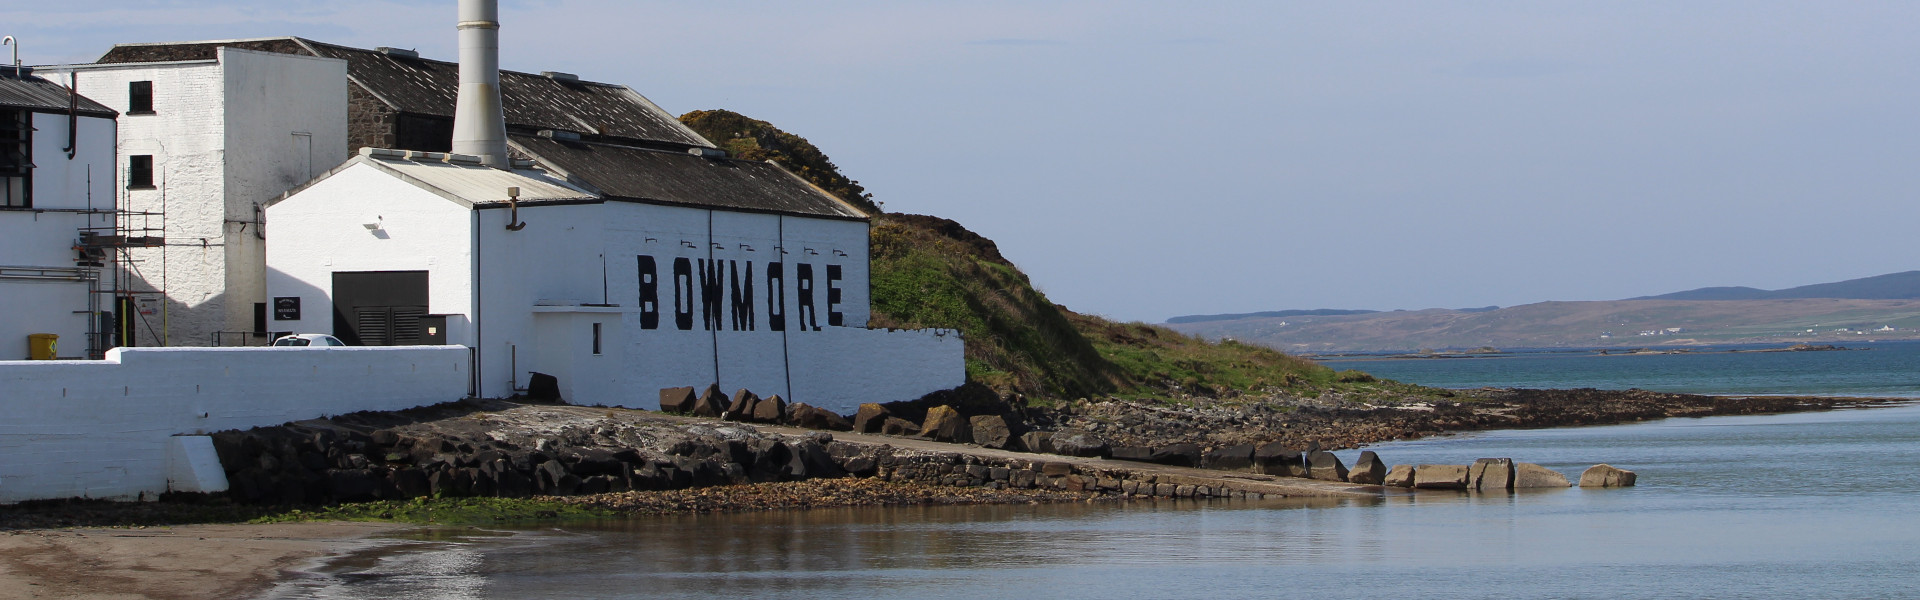 Bowmore Distillery on the shores of Lochindaal